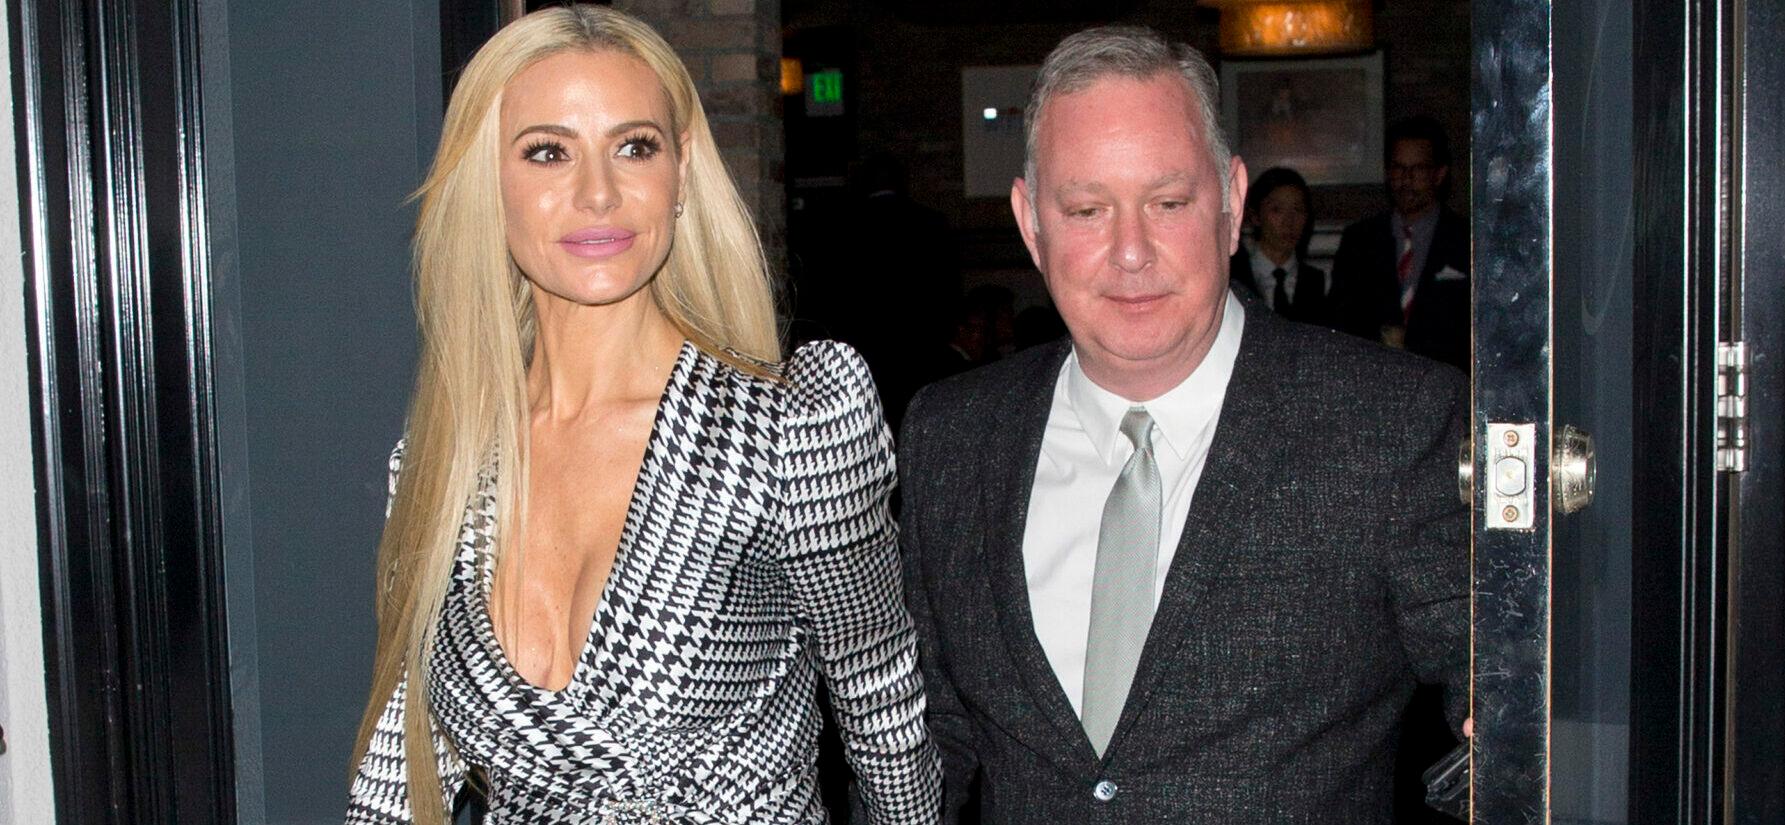 ‘RHOBH’ Star Dorit Kemsley Breaks Her Silence On Husband’s Controversial DUI